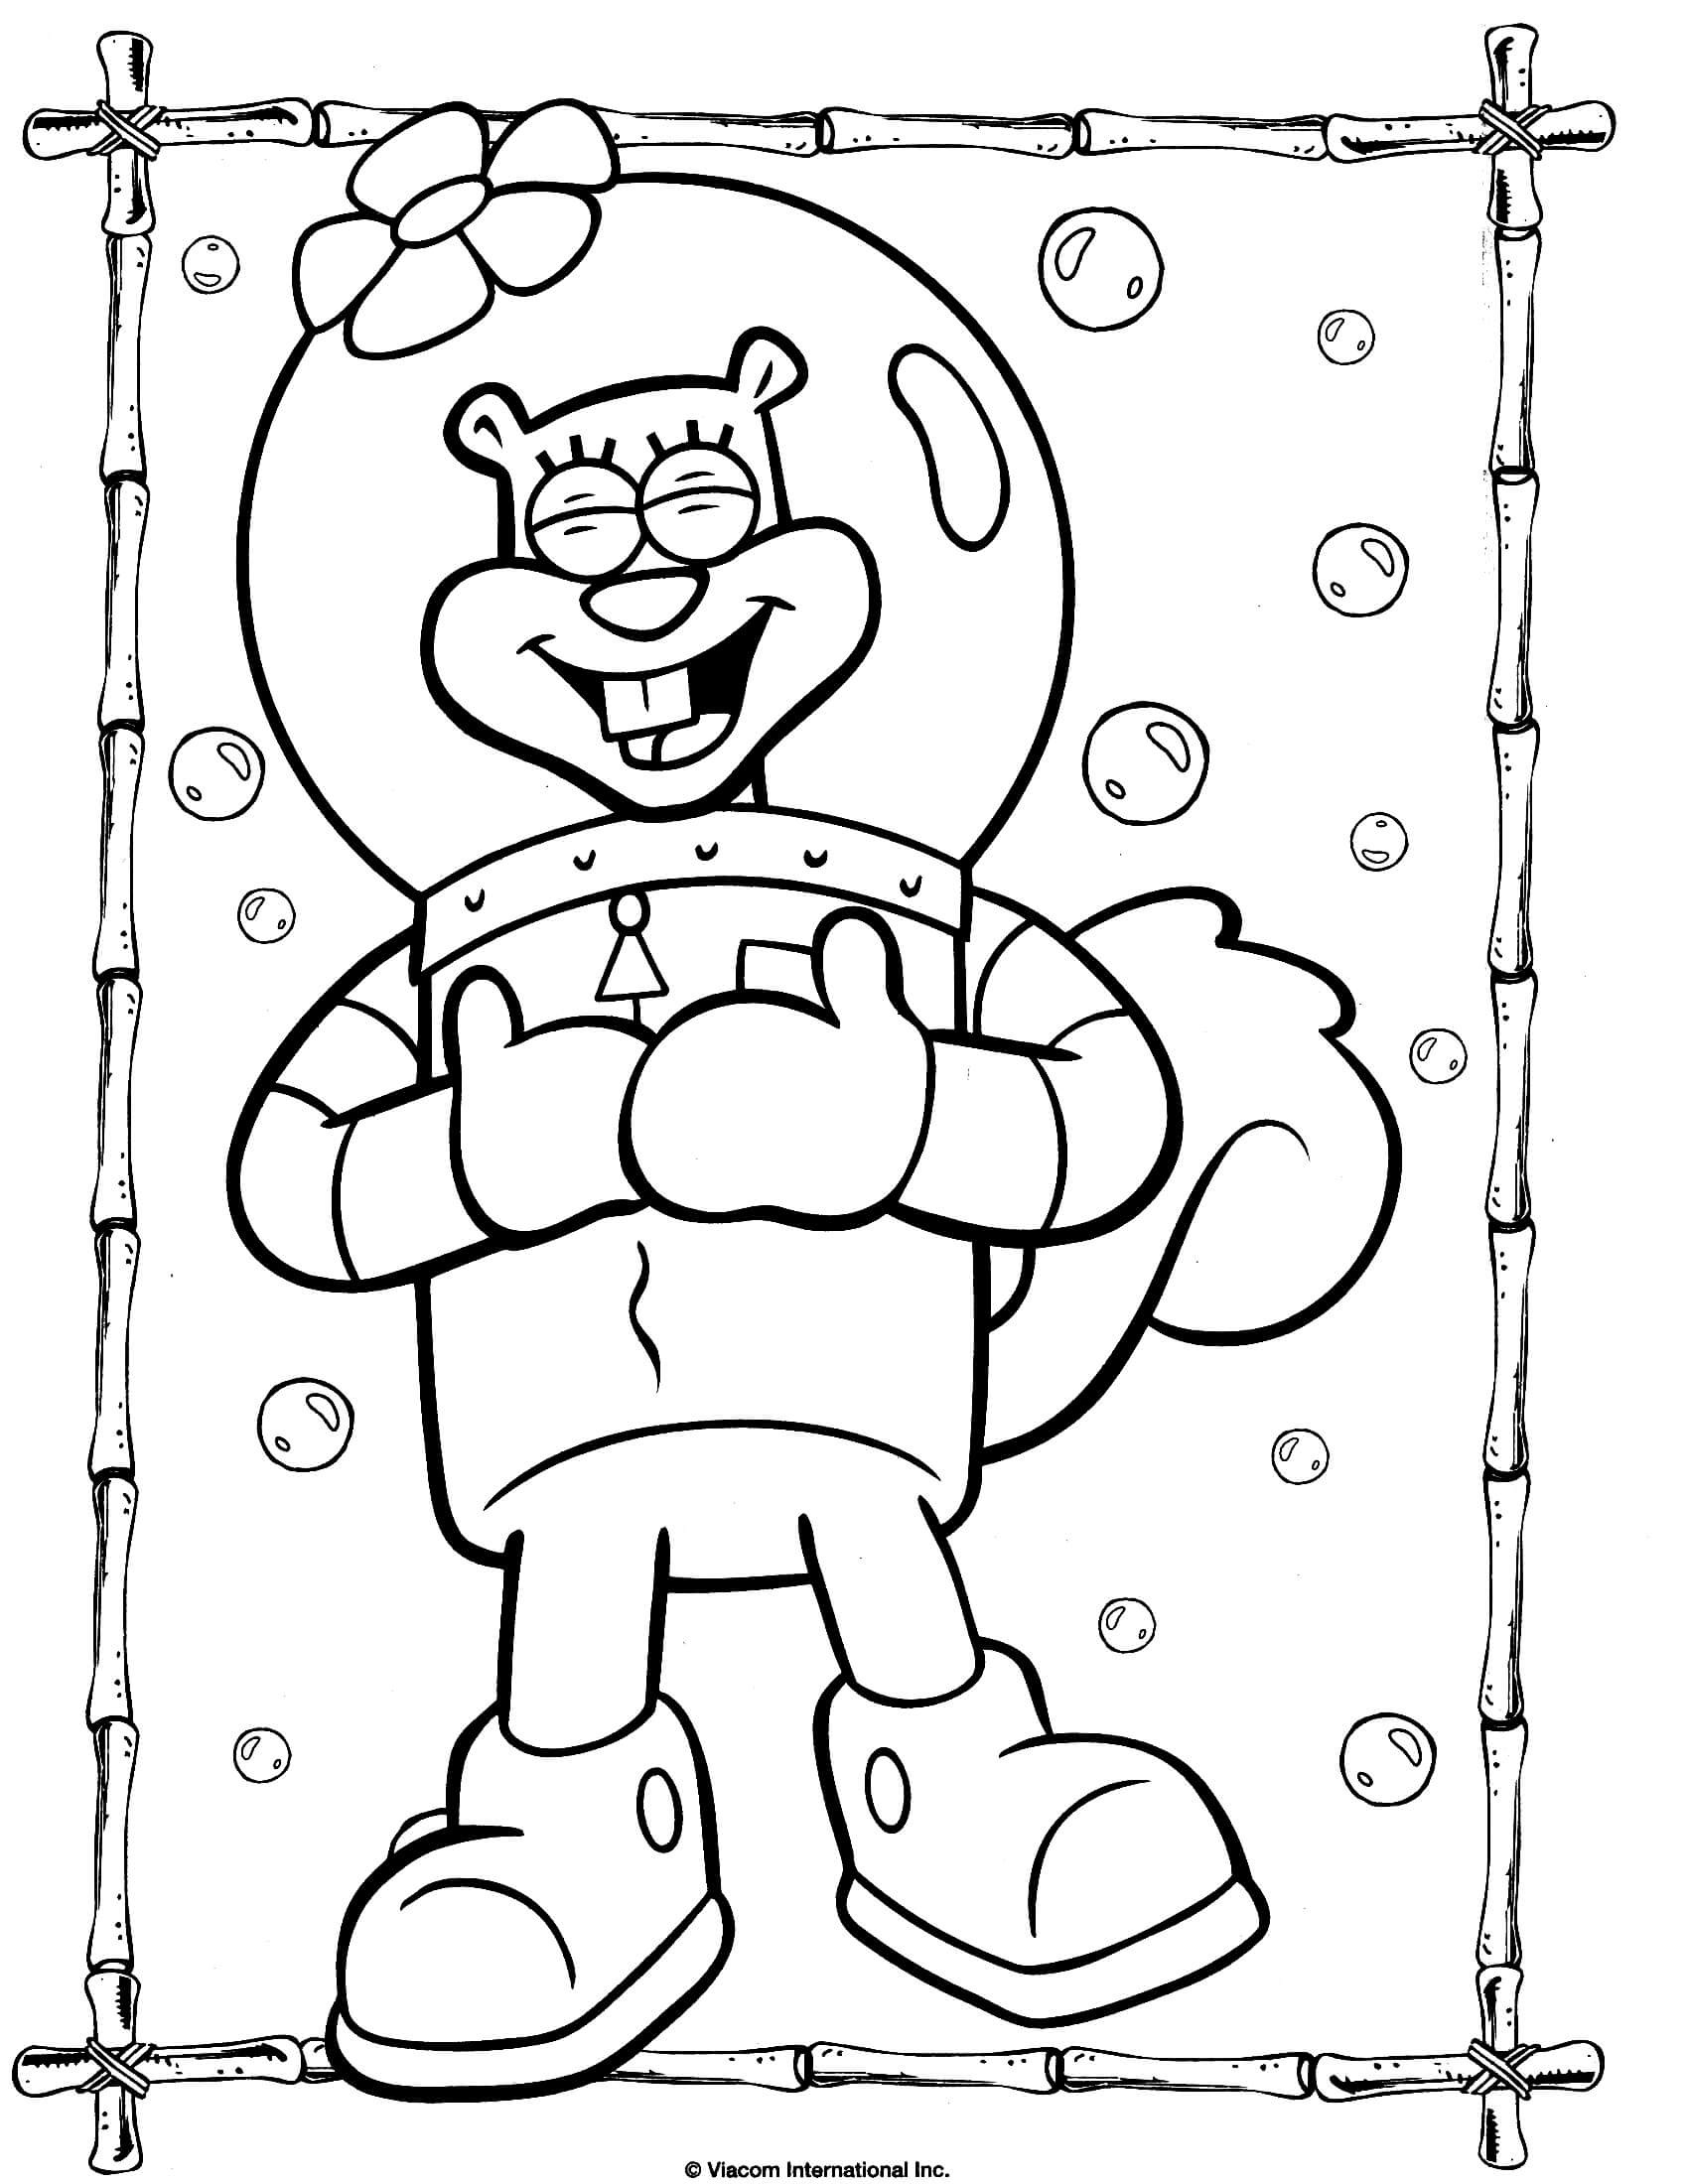 Best ideas about Spongebvob Coloring Pages For Girls
. Save or Pin spongebob coloring page Now.